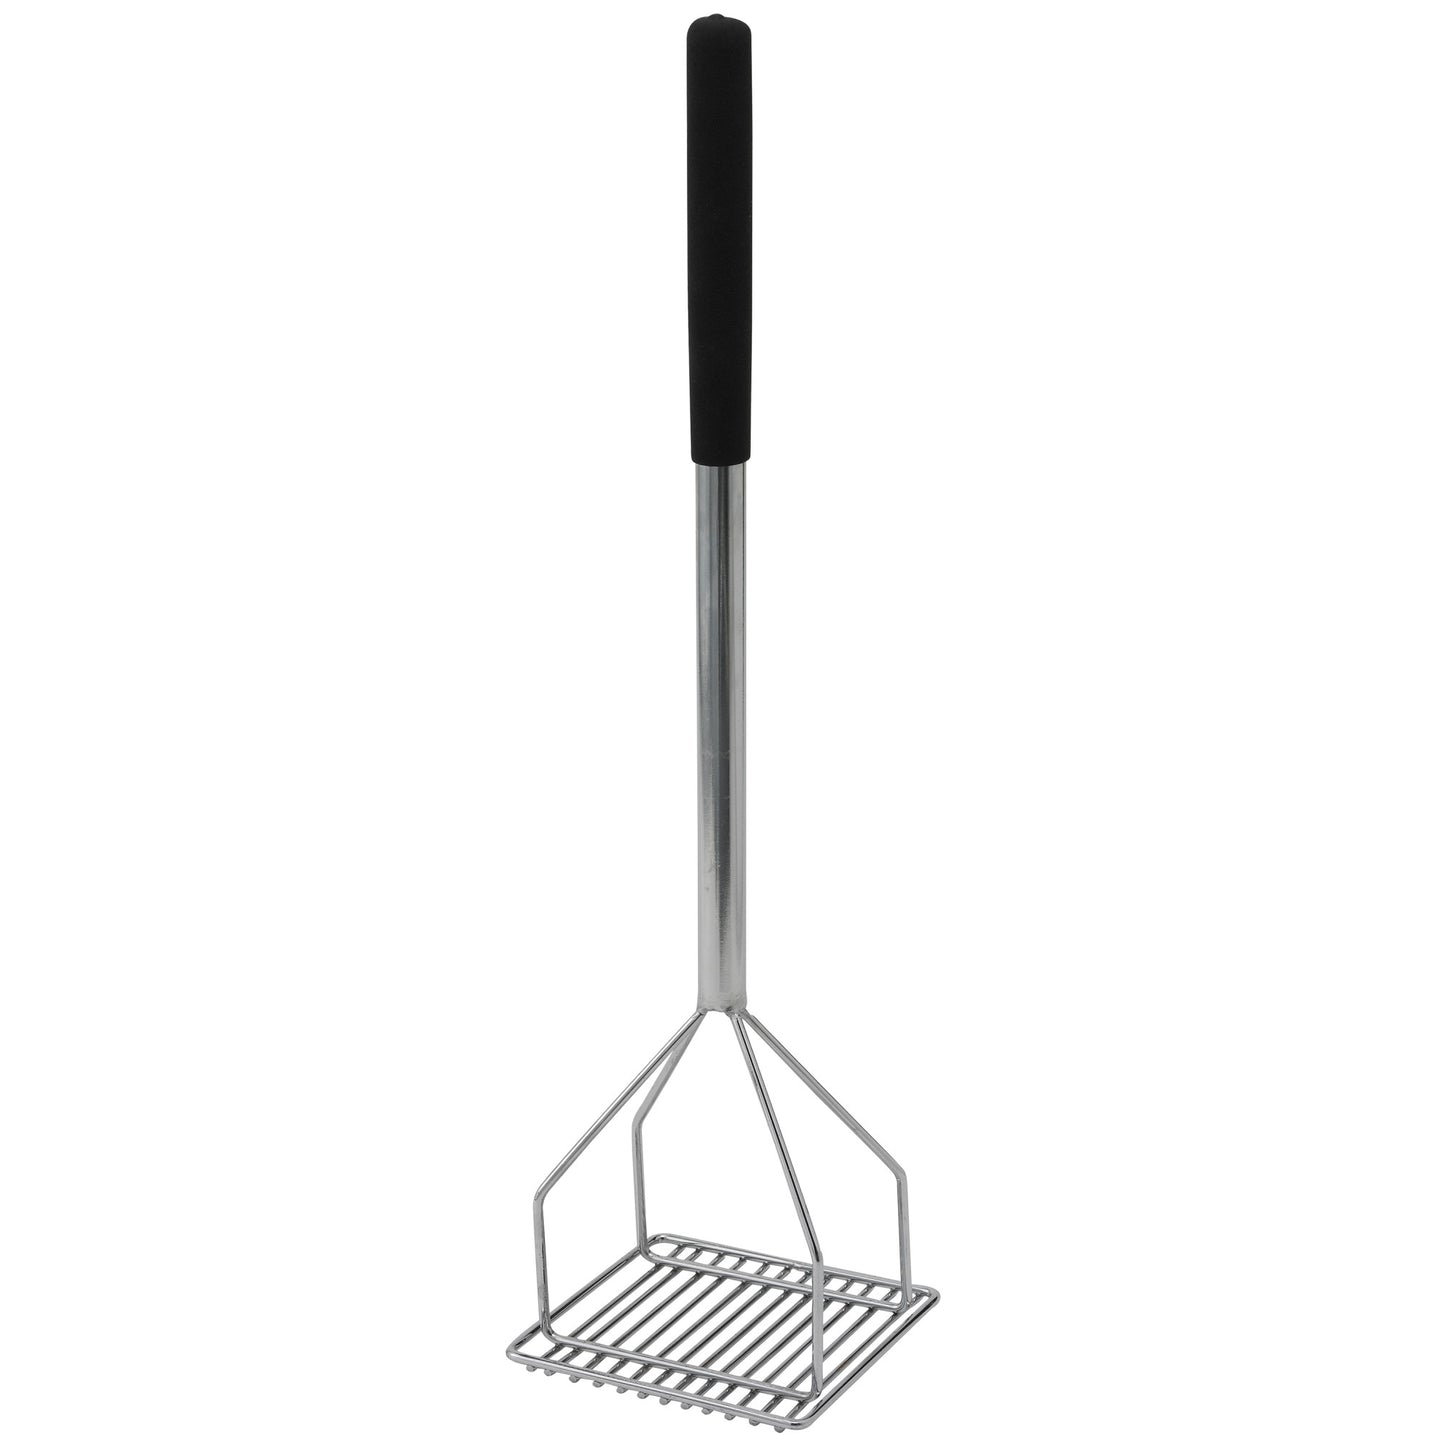 PTMP-24S - Potato Masher with Plastic Handle - 5-1/4" Square